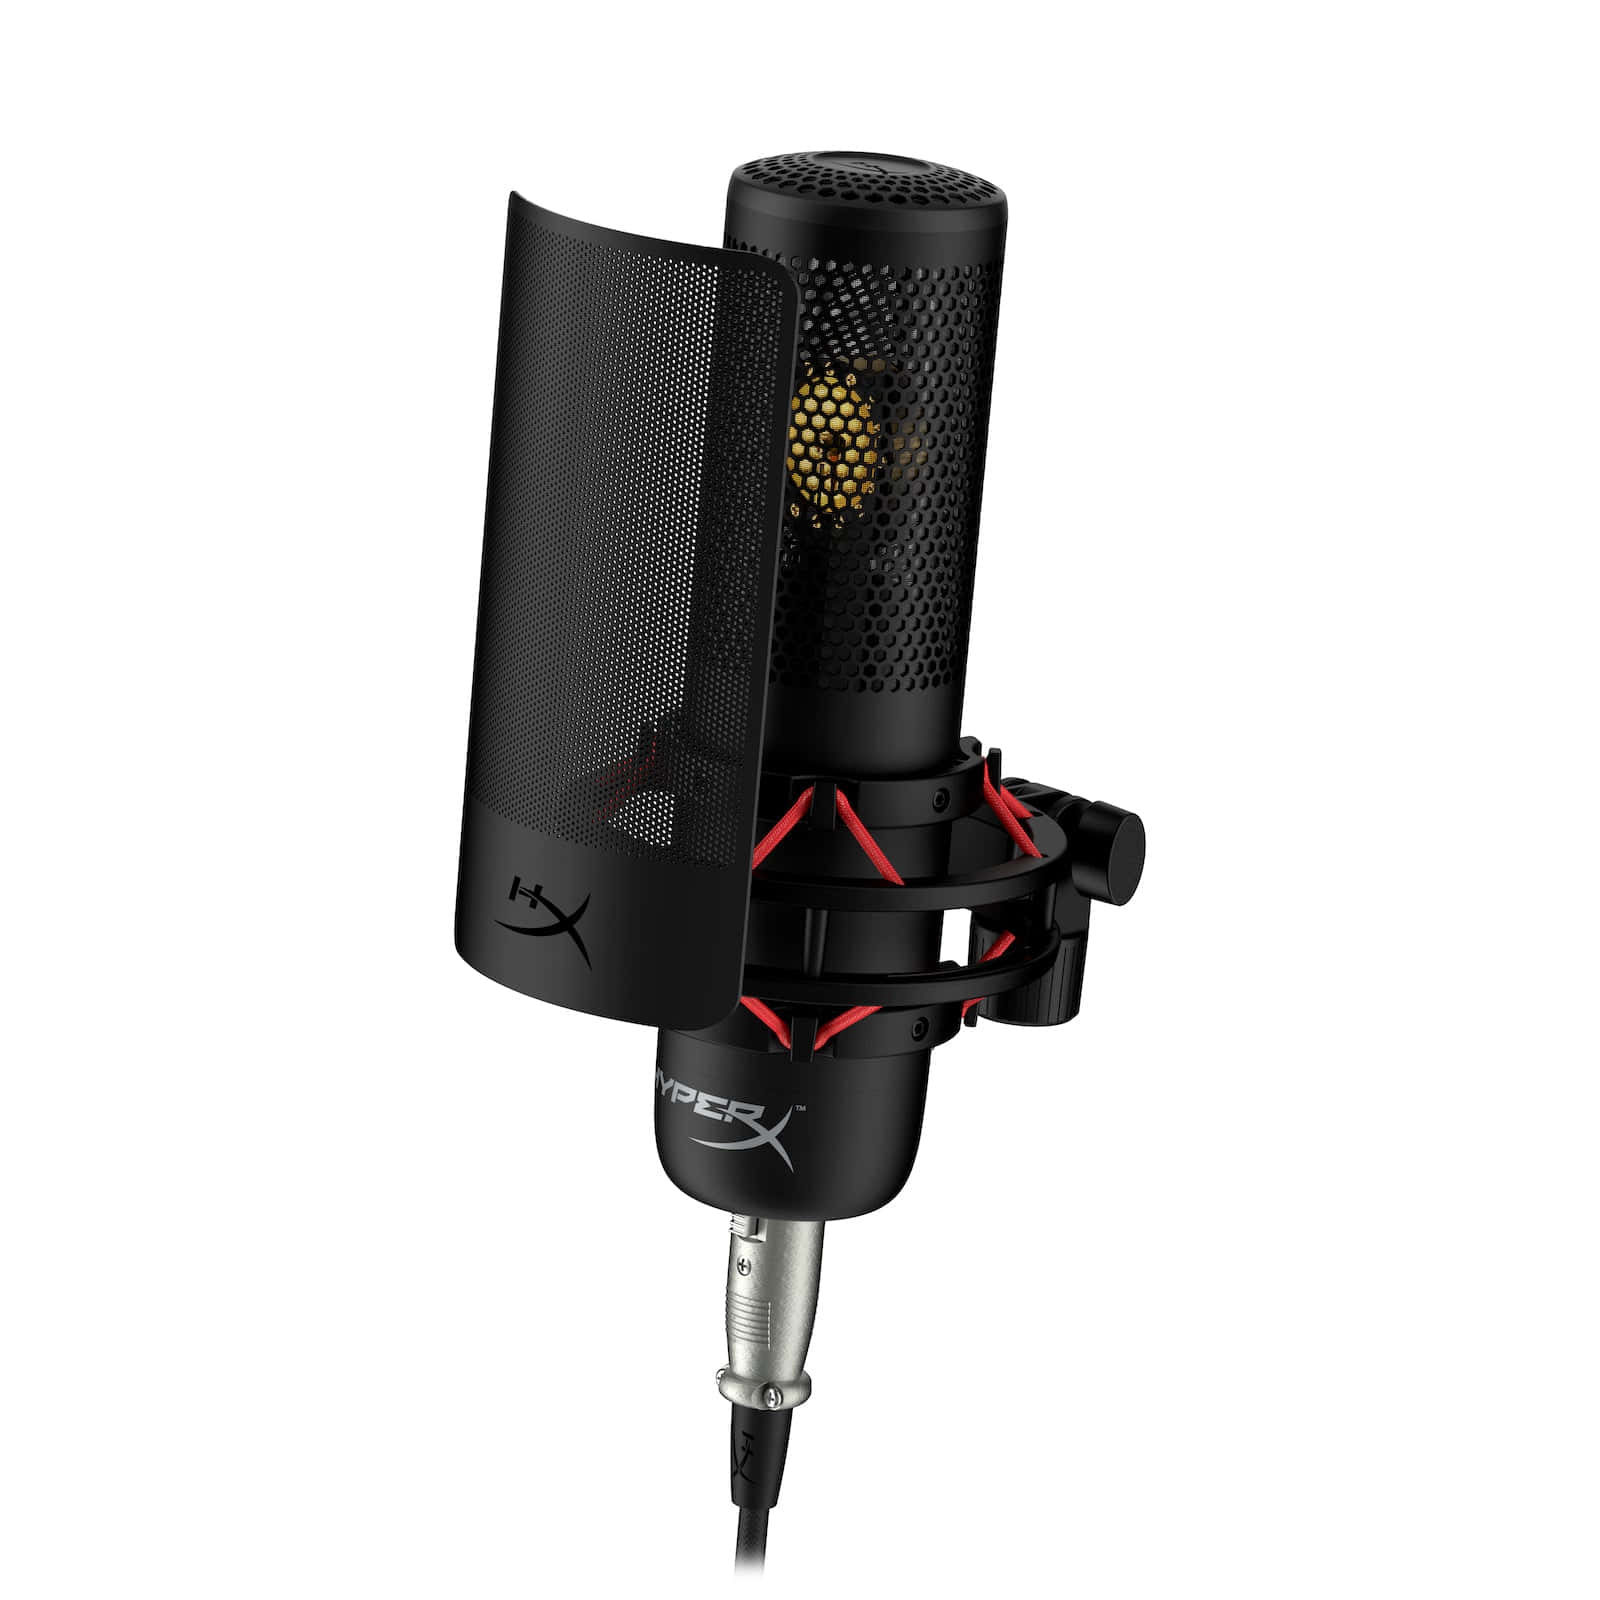 A Microphone With A Red And Black Cord